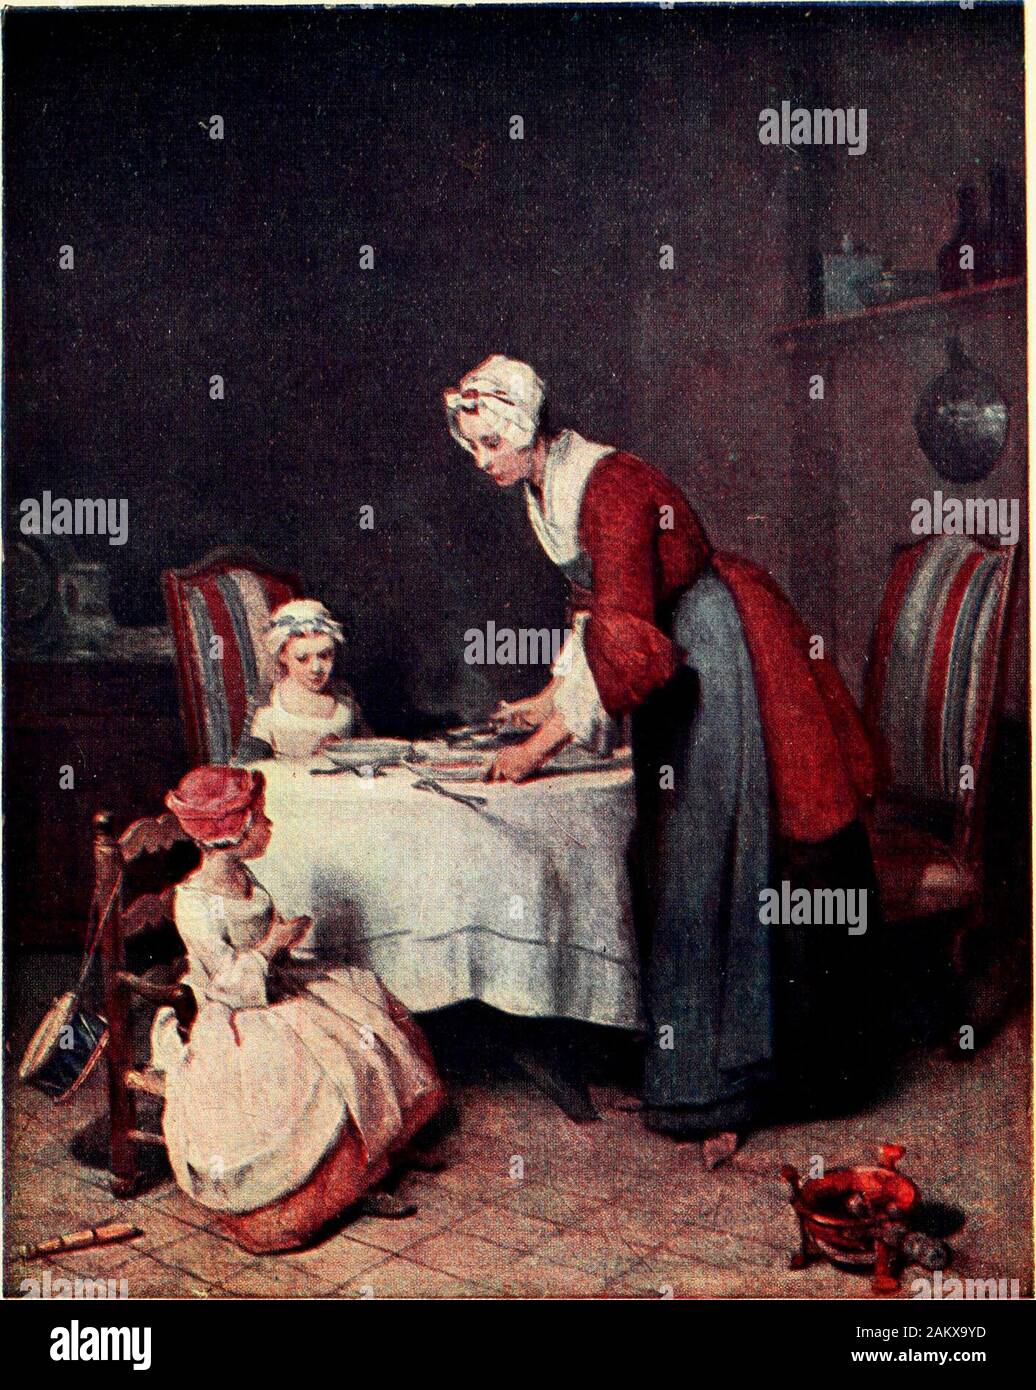 Chardin . u step back the objectstake form and begin to be real nature.On a later occasion he describes Chardinsstyle as a harsh method of painting withthe thumb as much as with the brush; ajuxtaposition of touches, a confused and PLATE IV.—LE B£N£DICITE (GRACEBEFORE MEAT) (In the Louvre) Le Benedicite, or Grace before Meat, is perhaps the mostpopular and best known of all Chardins domestic genre pieces. Itcombines the highest technical and artistic qualities with a touchingsimplicity of sentiment that must endear it even to those who cannotappreciate its artistry. Several replicas of it are k Stock Photo